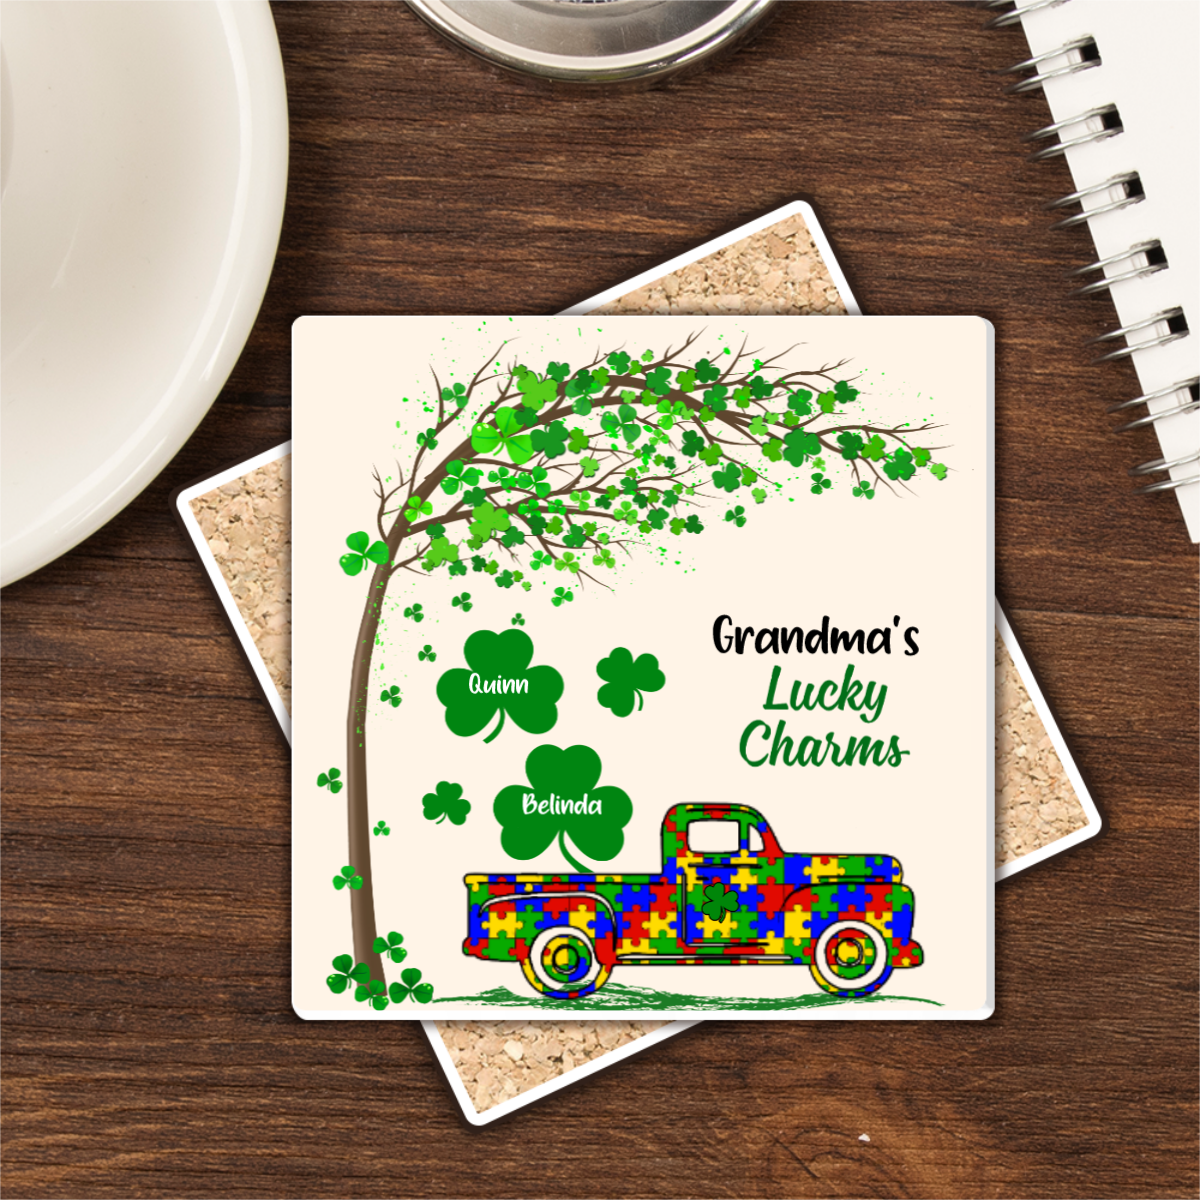 Personalized Family Square Stone Coasters Gifts - My Lucky Charms AZ